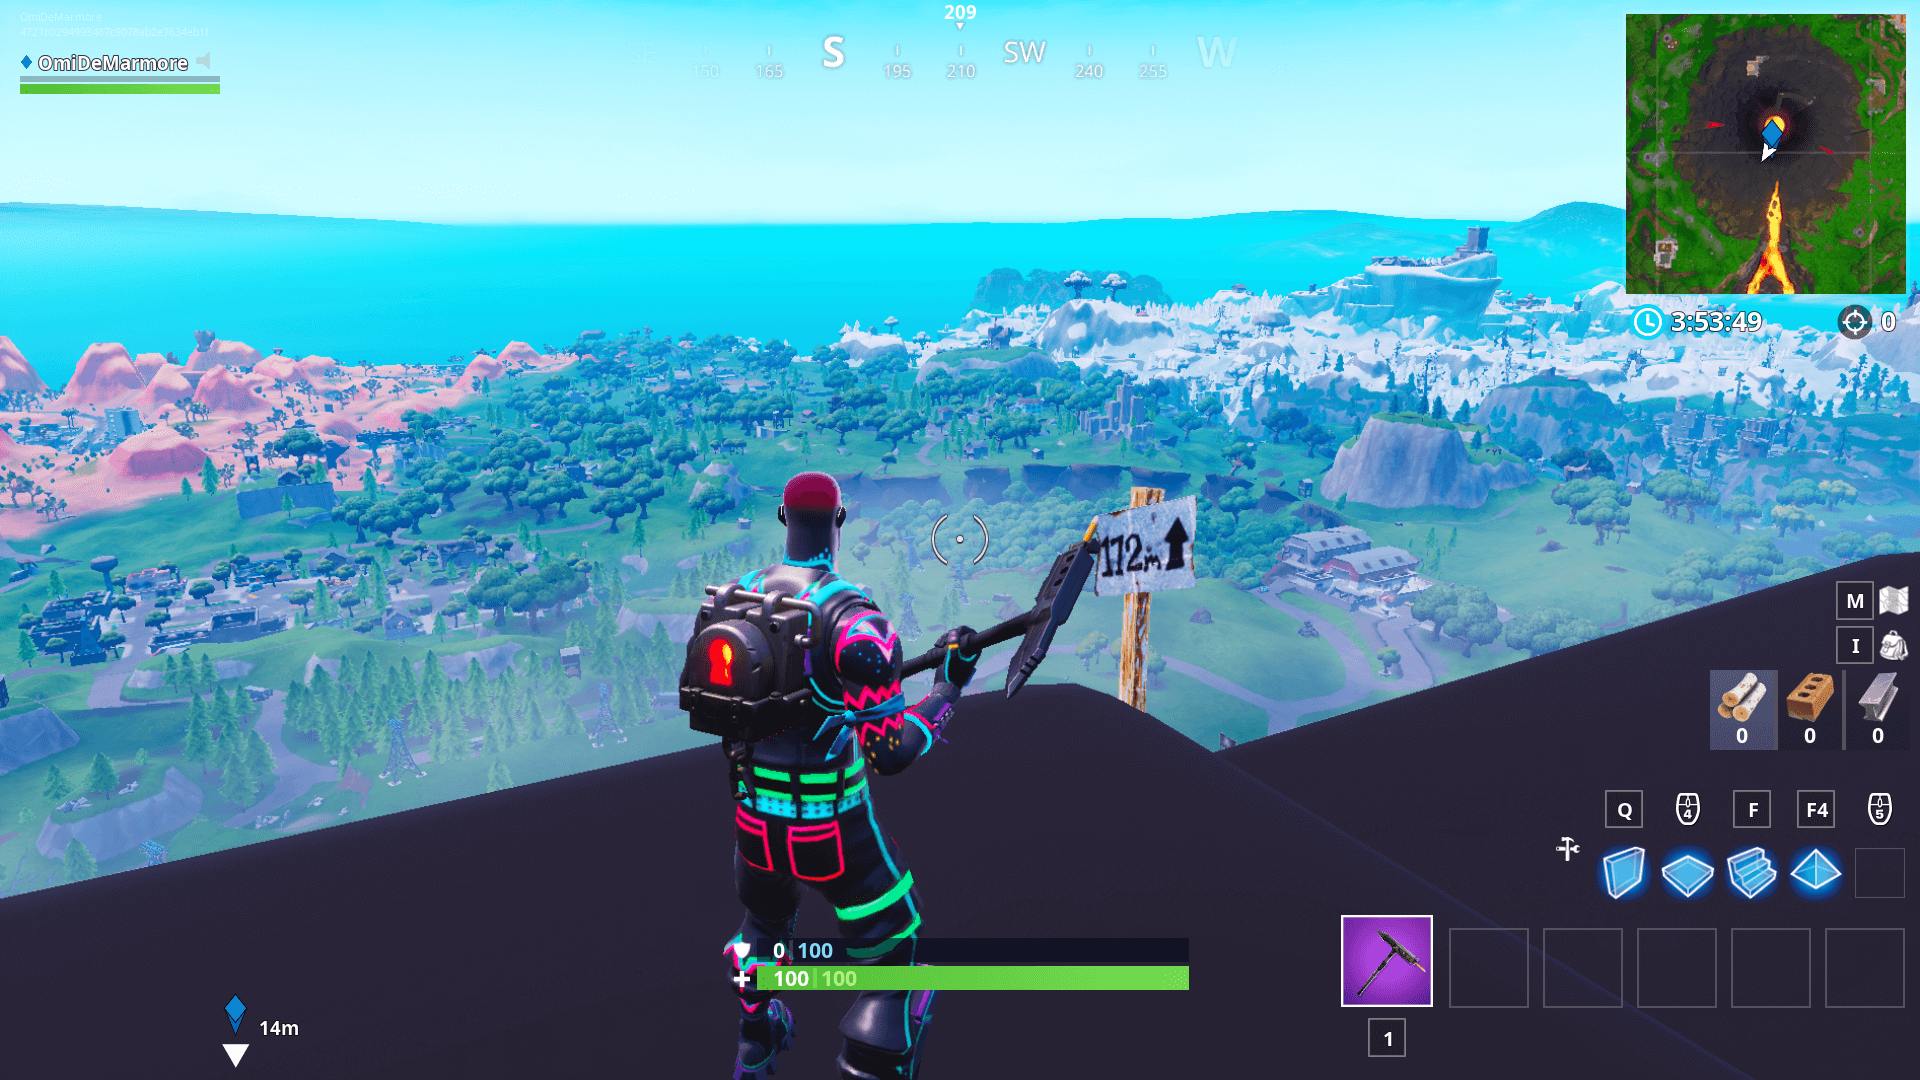 Fortnite 5 Highest Mountain Location Fortnite Location Of The 5 Highest Elevations On The Island Season 8 Dot Esports